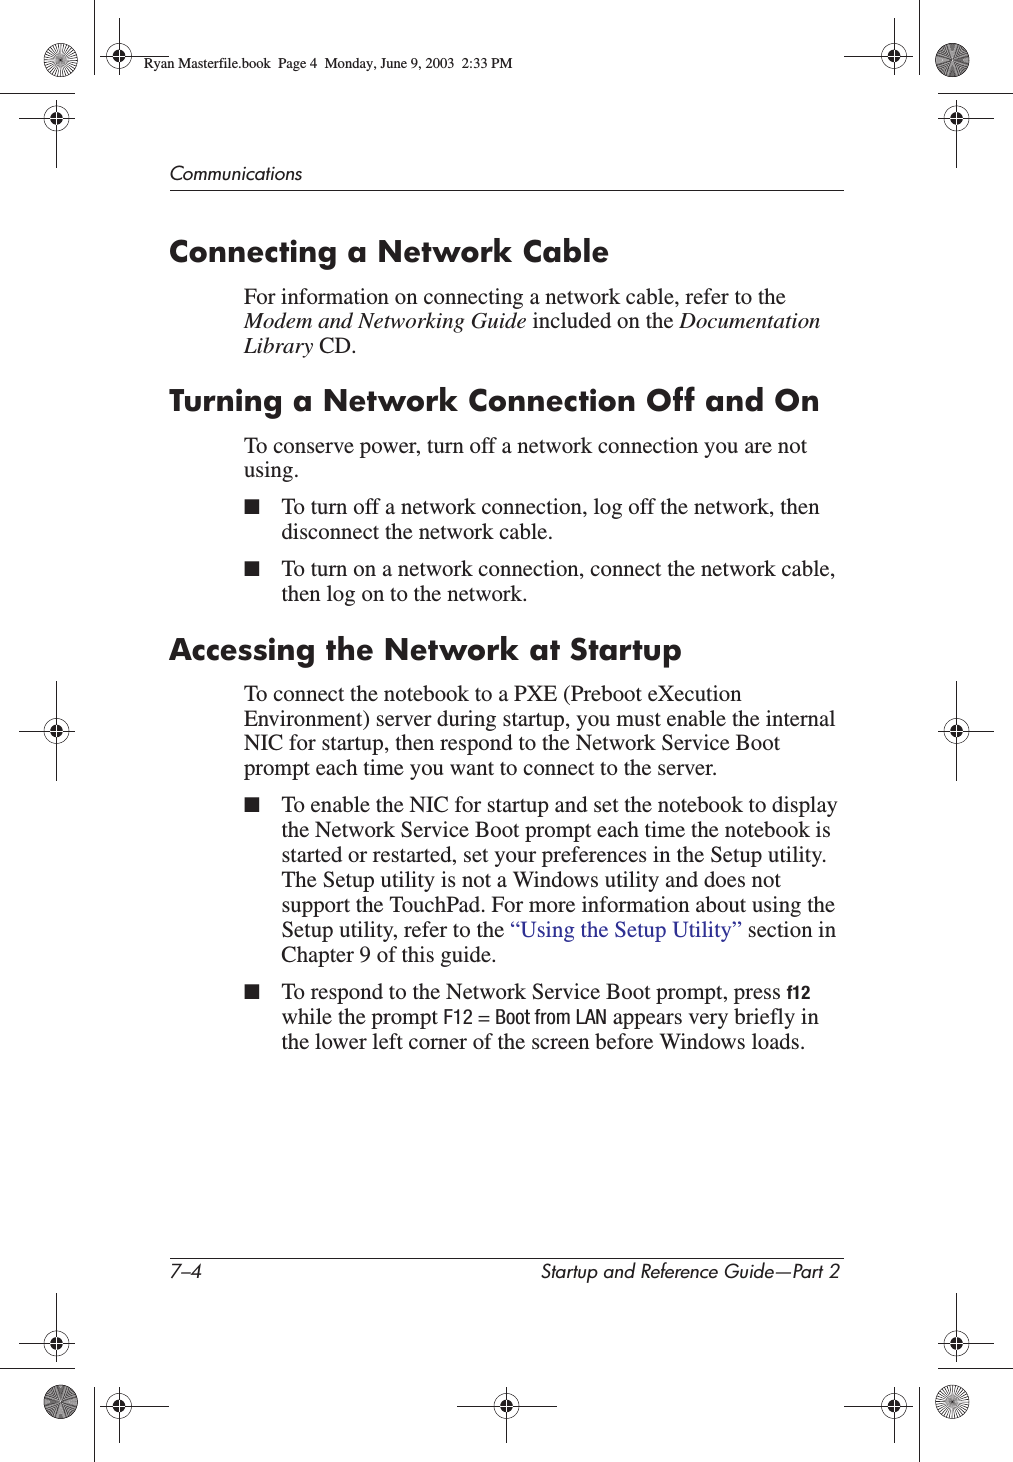 7–4 Startup and Reference Guide—Part 2CommunicationsConnecting a Network CableFor information on connecting a network cable, refer to the Modem and Networking Guide included on the DocumentationLibrary CD.Turning a Network Connection Off and OnTo conserve power, turn off a network connection you are not using.■To turn off a network connection, log off the network, then disconnect the network cable.■To turn on a network connection, connect the network cable, then log on to the network.Accessing the Network at StartupTo connect the notebook to a PXE (Preboot eXecution Environment) server during startup, you must enable the internal NIC for startup, then respond to the Network Service Boot prompt each time you want to connect to the server.■To enable the NIC for startup and set the notebook to display the Network Service Boot prompt each time the notebook is started or restarted, set your preferences in the Setup utility. The Setup utility is not a Windows utility and does not support the TouchPad. For more information about using the Setup utility, refer to the “Using the Setup Utility” section in Chapter 9 of this guide.■To respond to the Network Service Boot prompt, press f12while the prompt F12 = Boot from LAN appears very briefly in the lower left corner of the screen before Windows loads.Ryan Masterfile.book  Page 4  Monday, June 9, 2003  2:33 PM